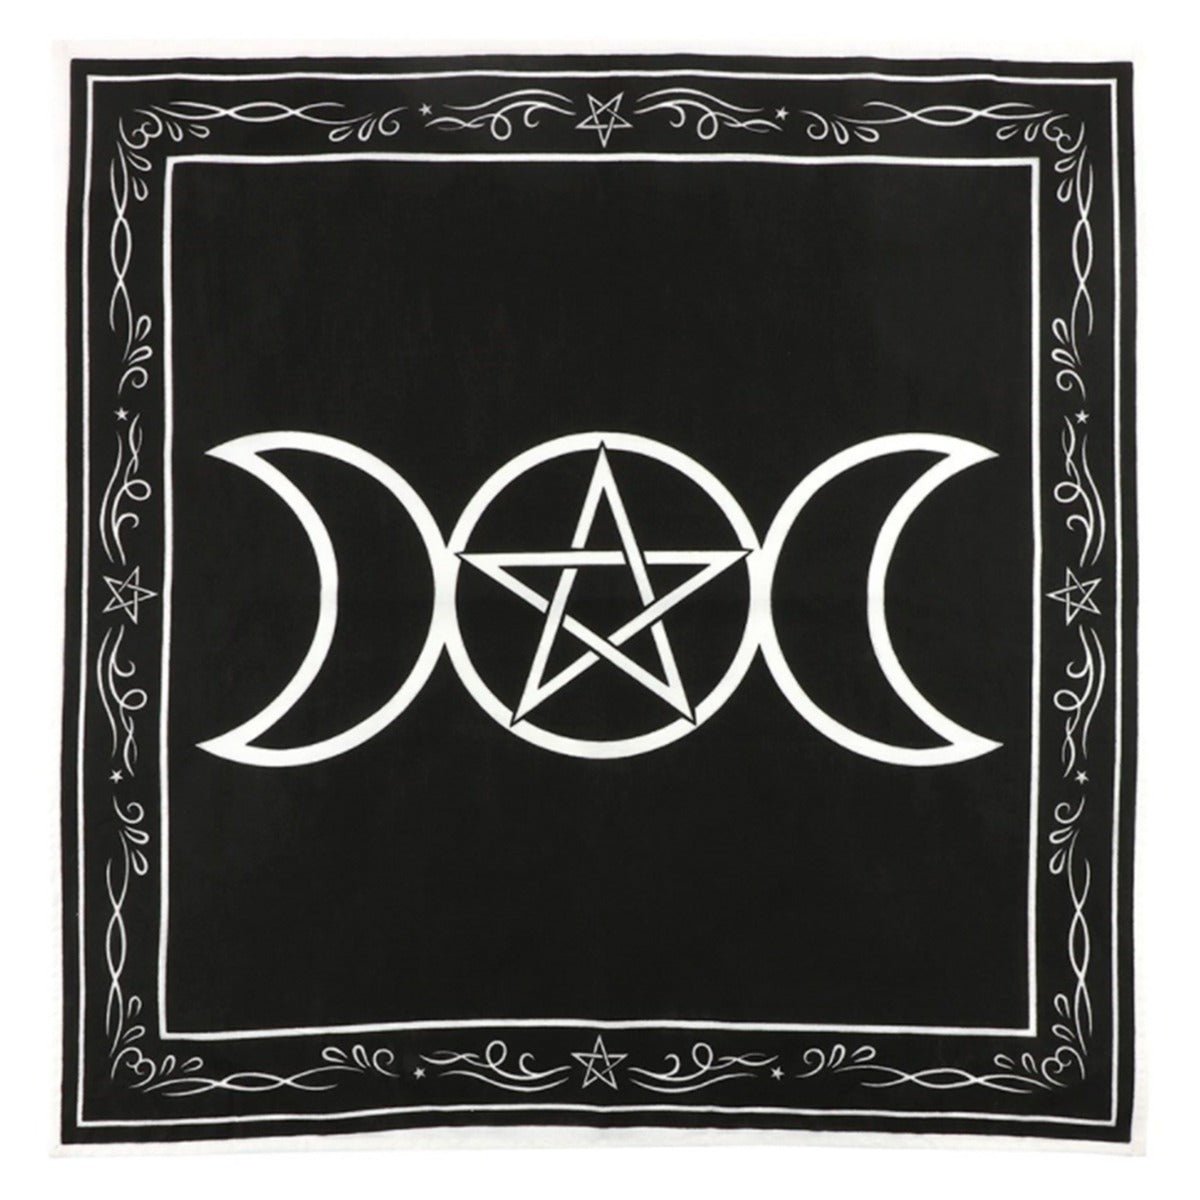 https://cdn.shopify.com/s/files/1/0589/9439/3227/products/triple-moon-pentacle-altar-cloth-275-inches-234751.jpg?v=1676960717&width=1200